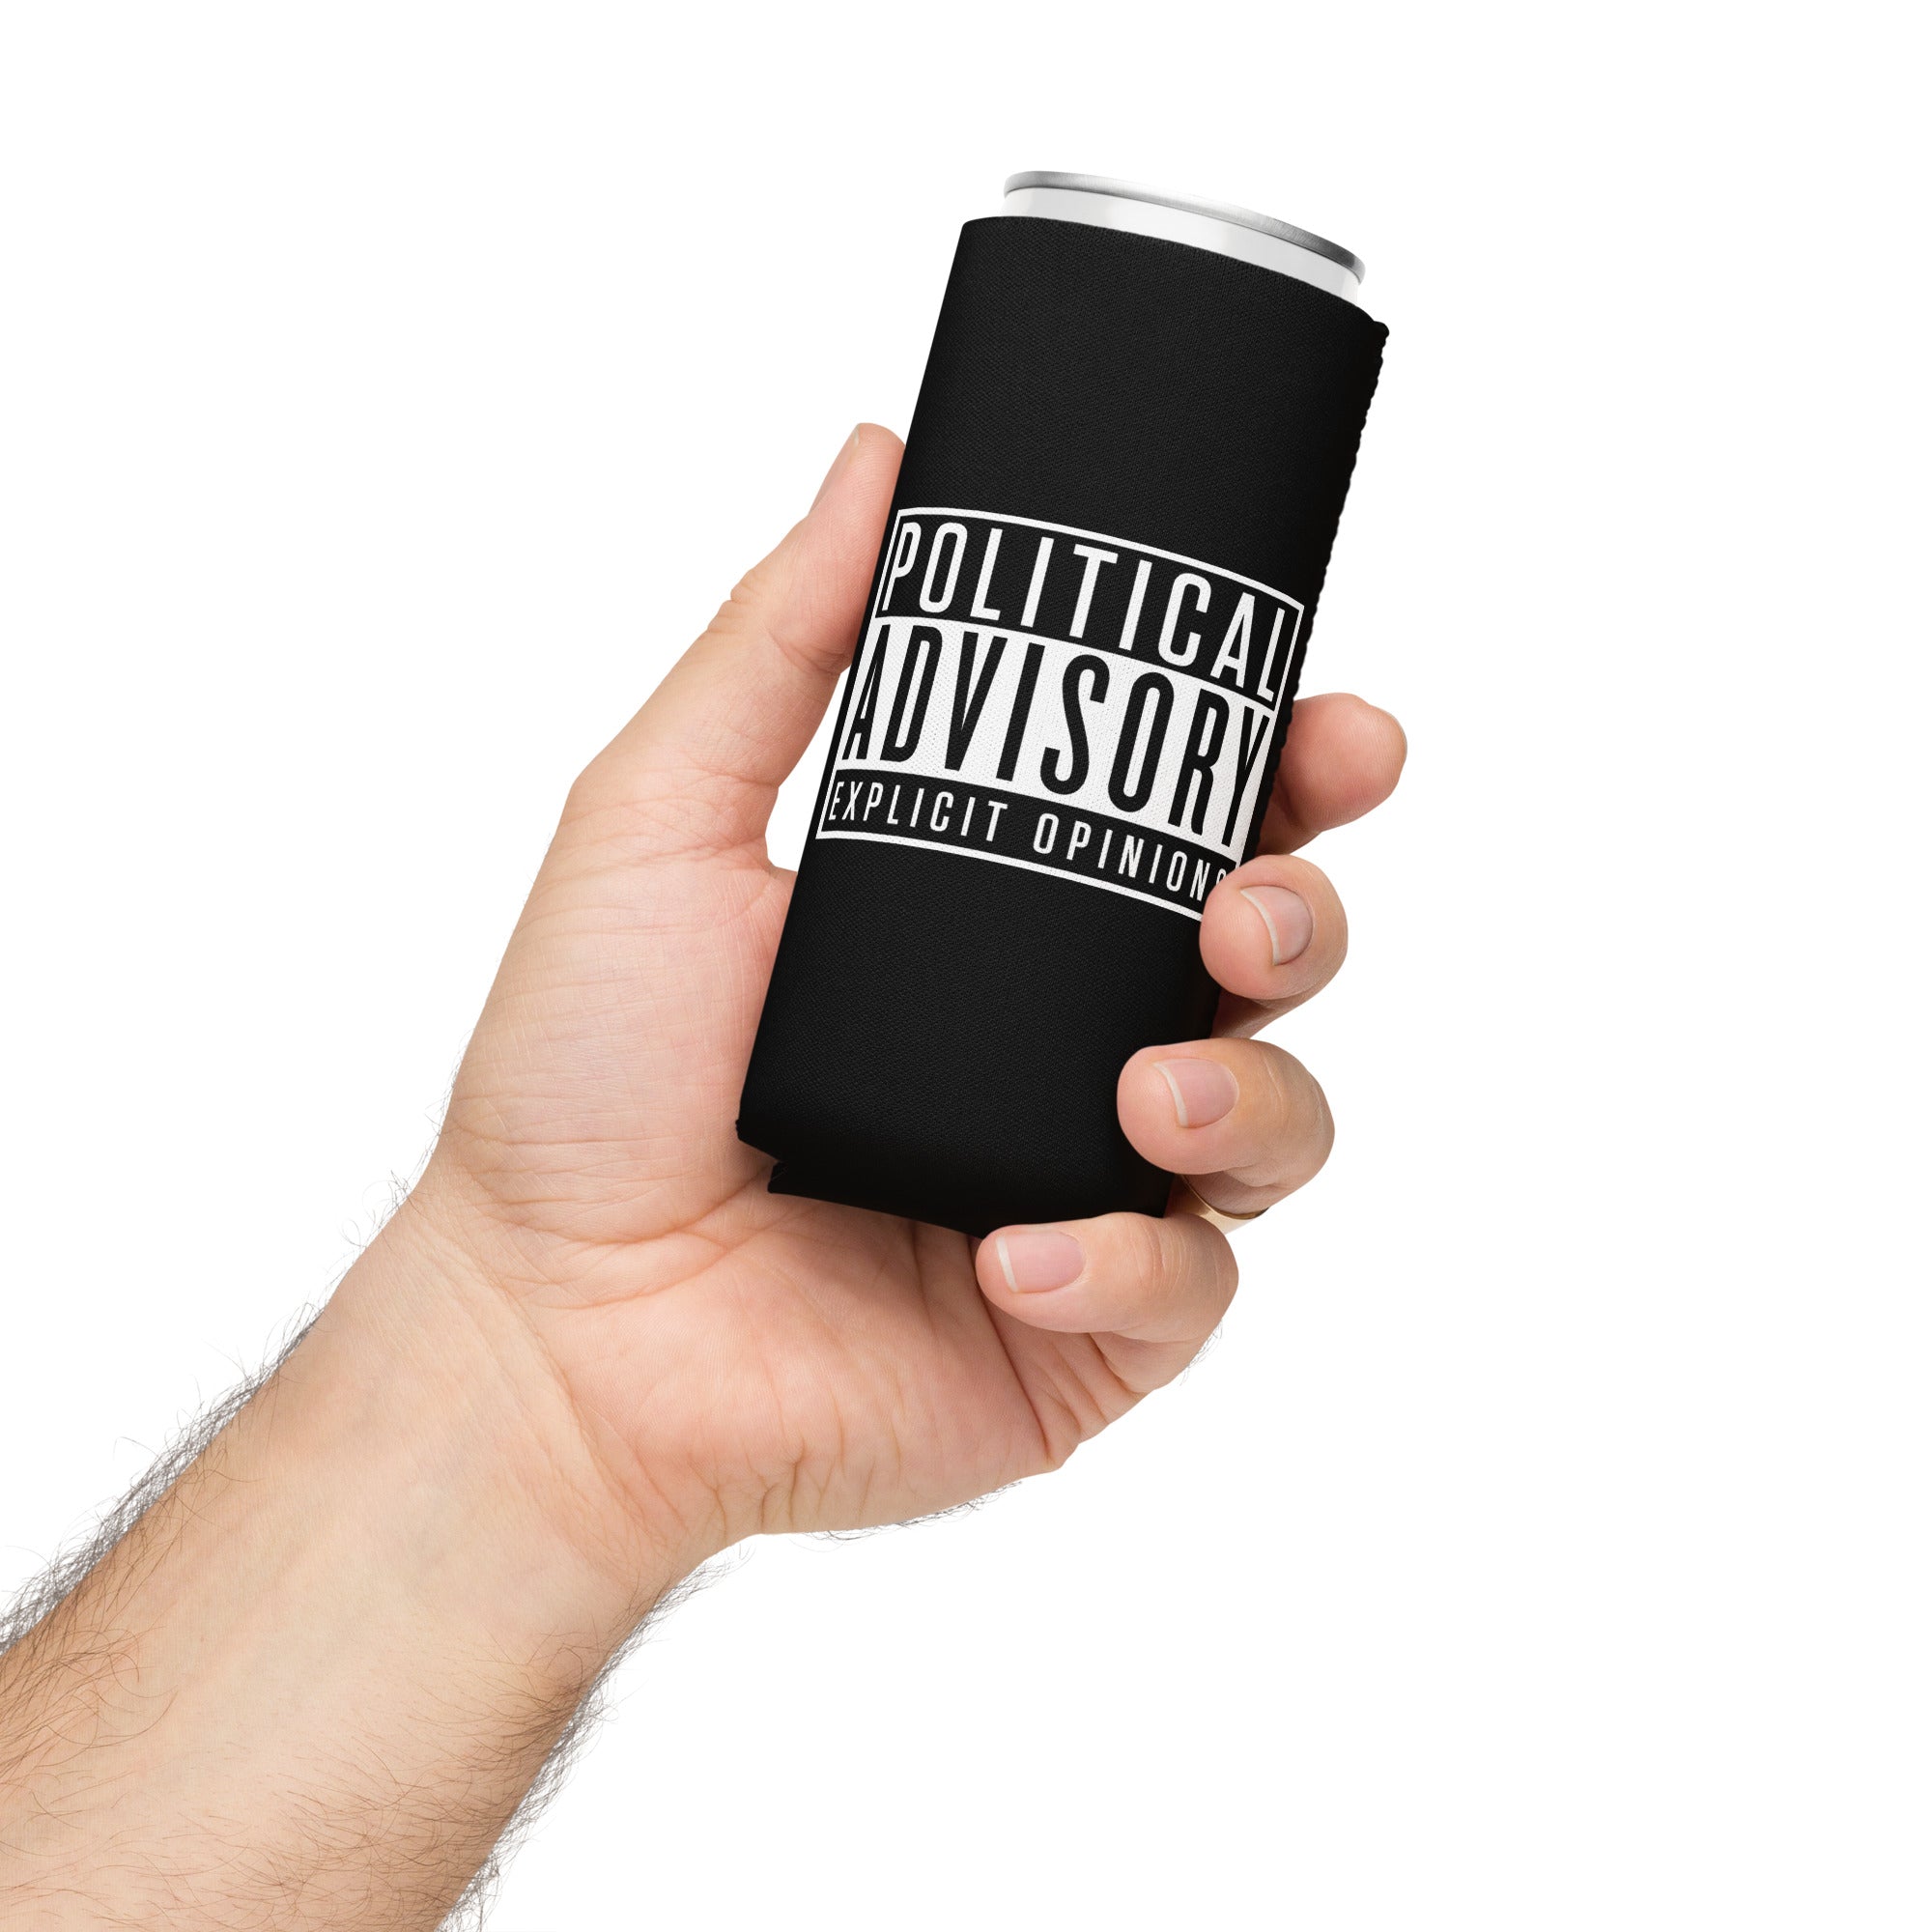 Explicit Opinions Warning Can Cooler